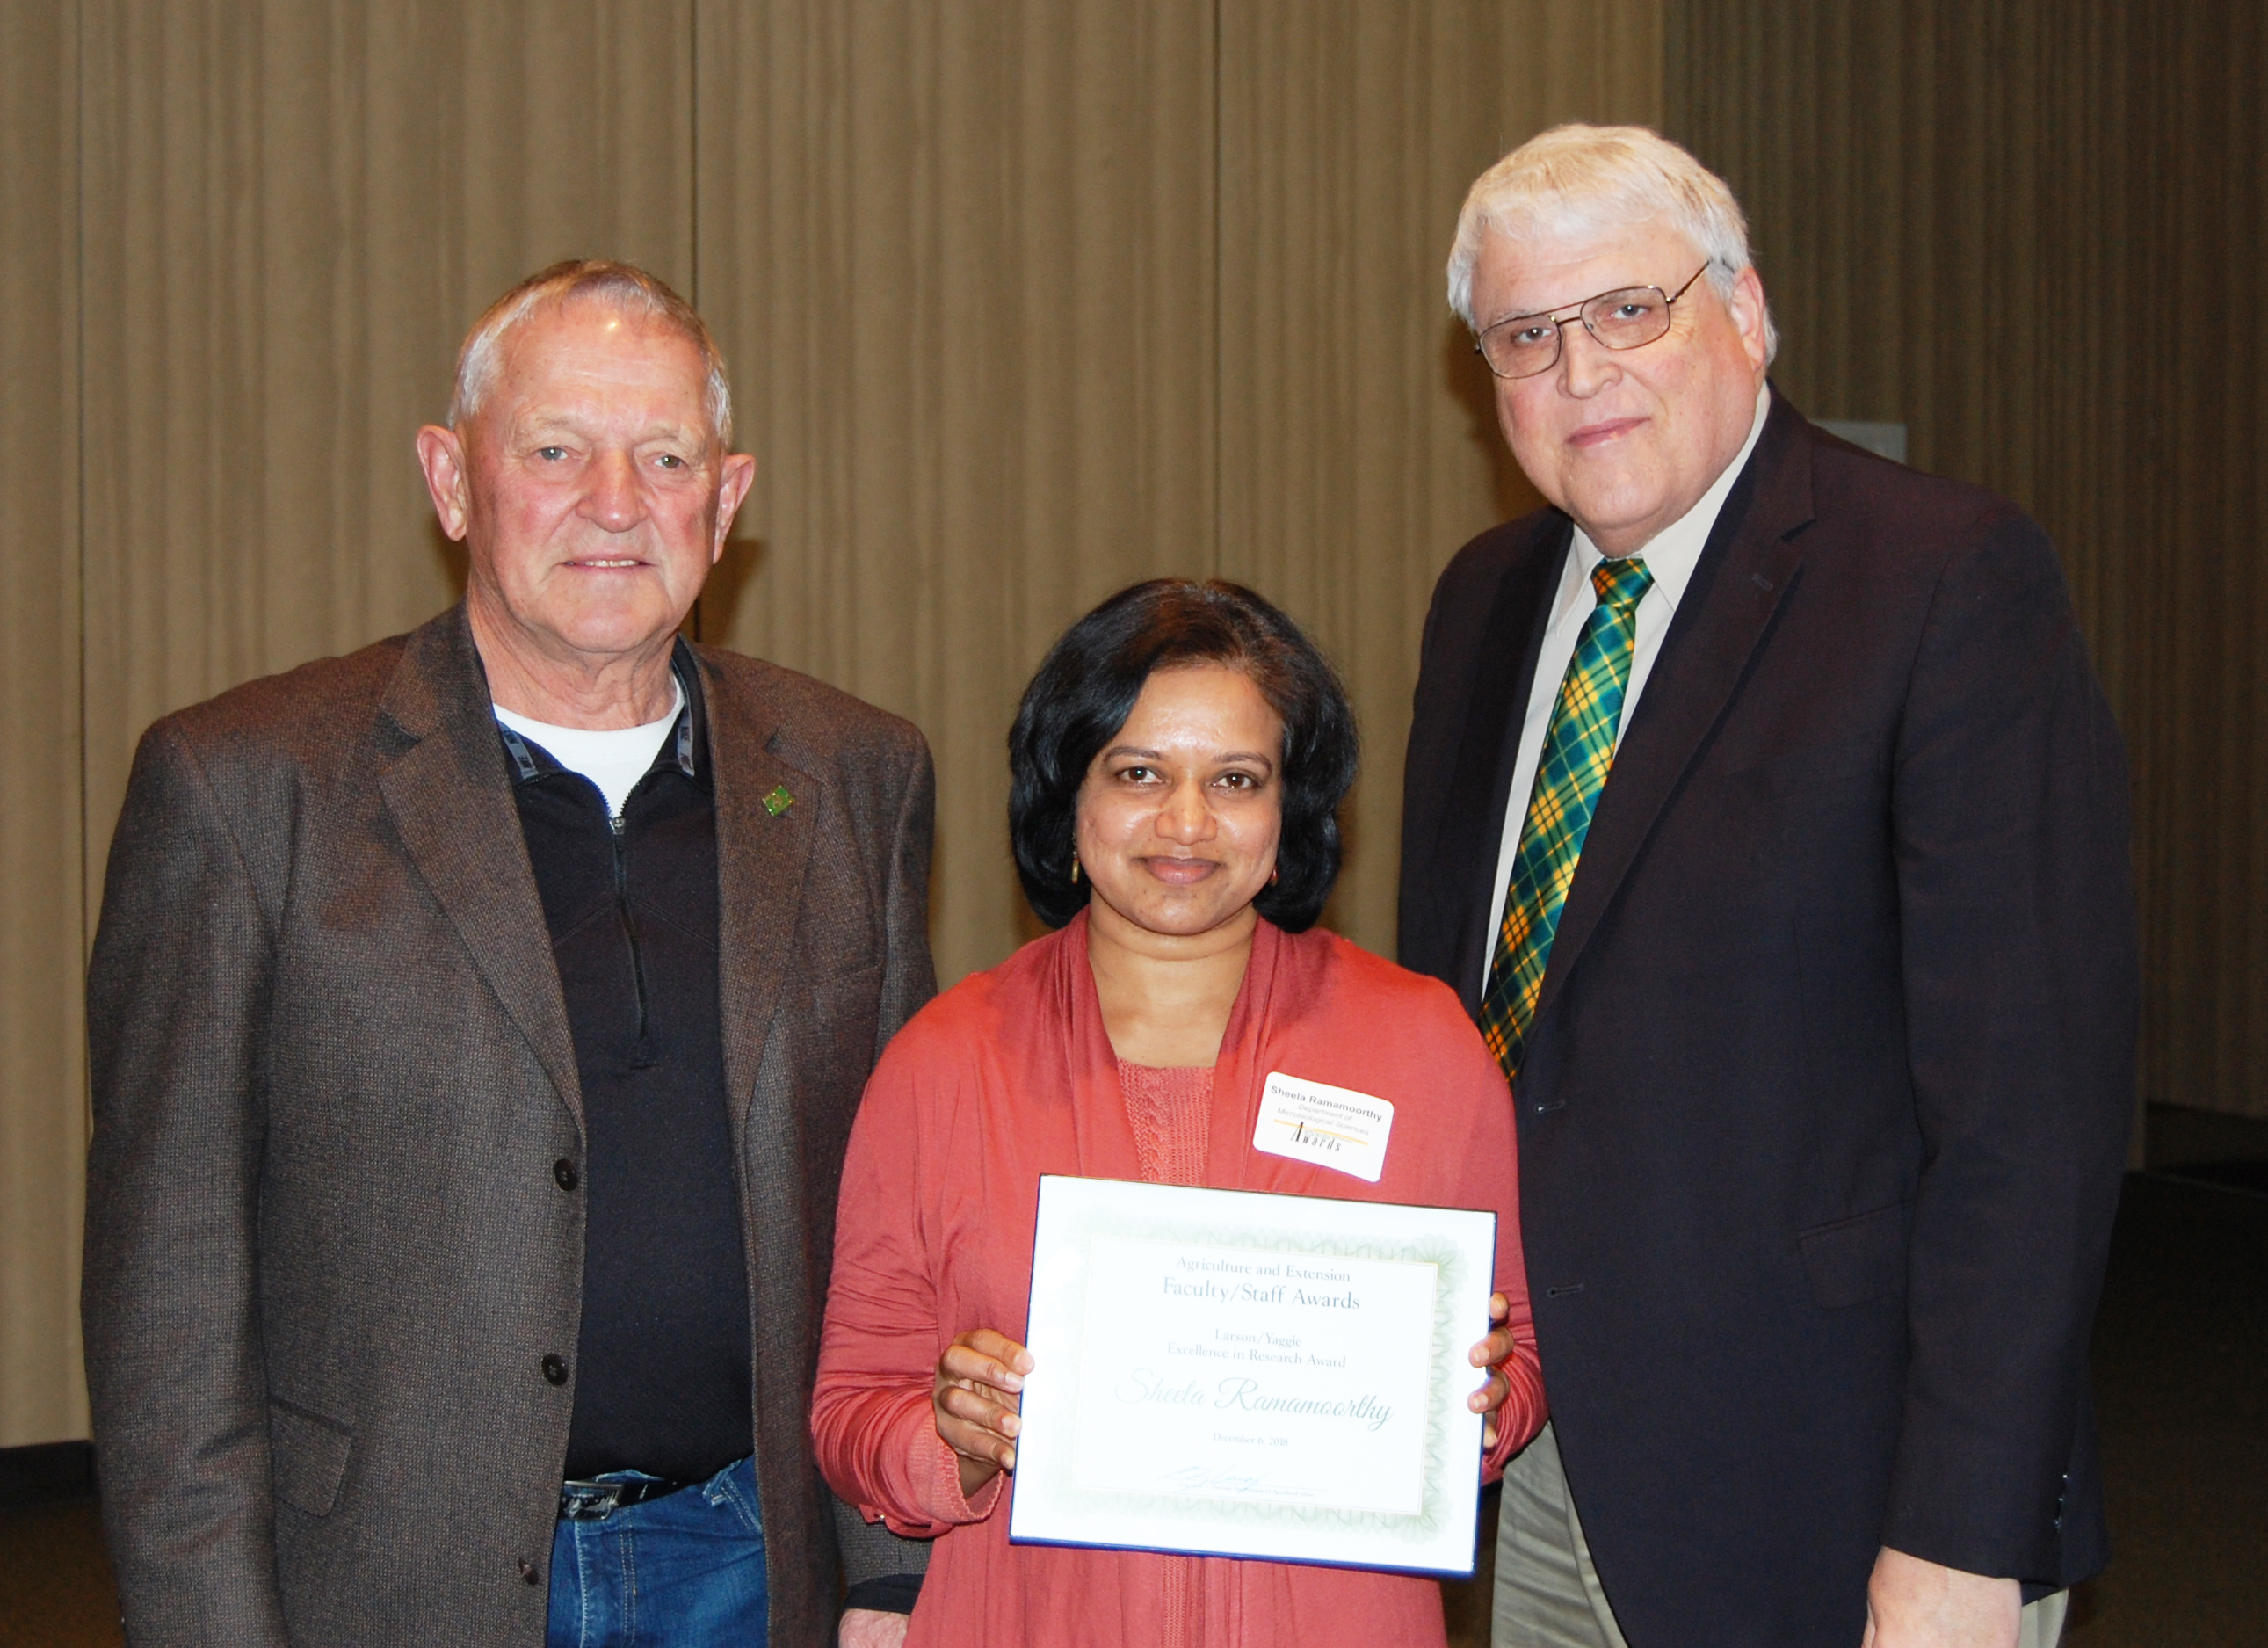 Sheela Ramamoorthy, center, receives the Larson/Yaggie Excellence in Research Award from Robert Yaggie, left, and David Buchanan, associate dean for academic programs. (NDSU photo)